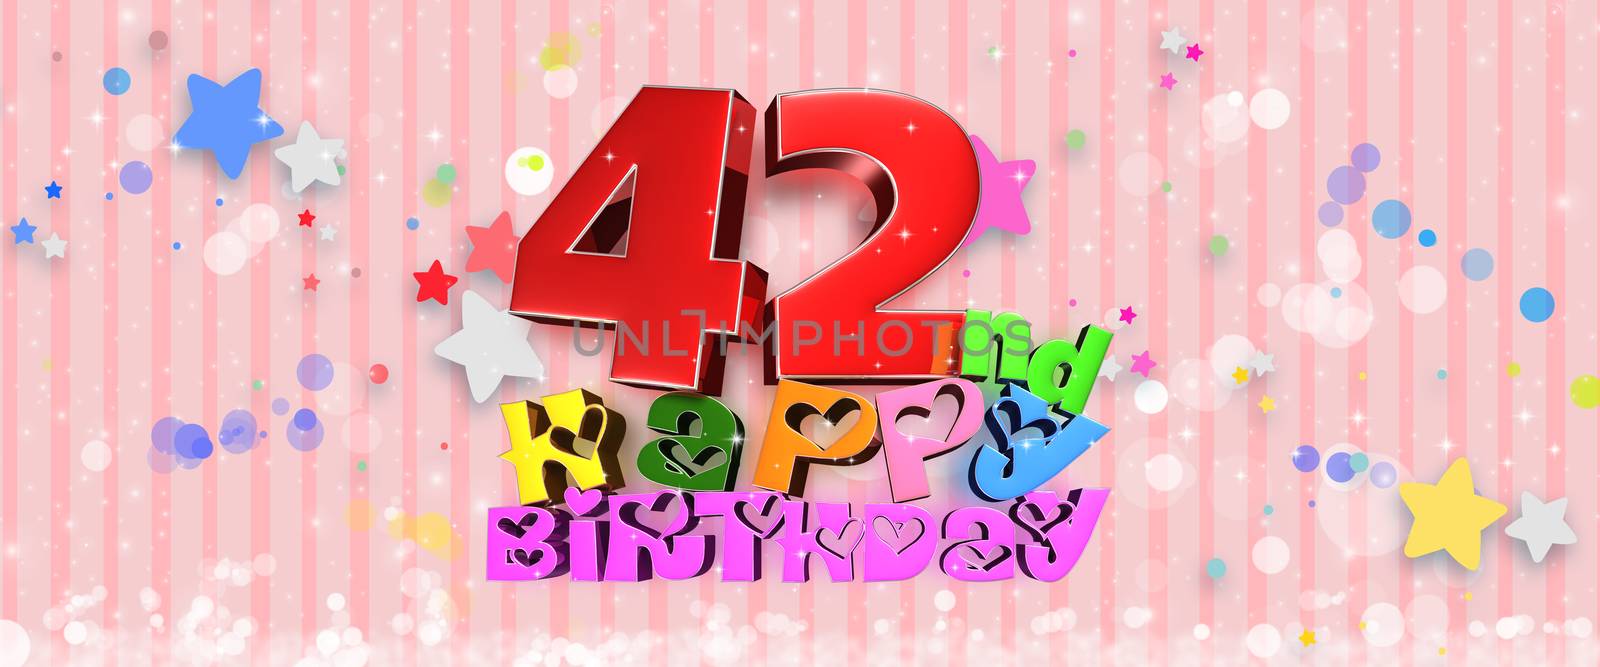 Anniversary Happy Birthday 42nd colorful 3d illustration on pink background.